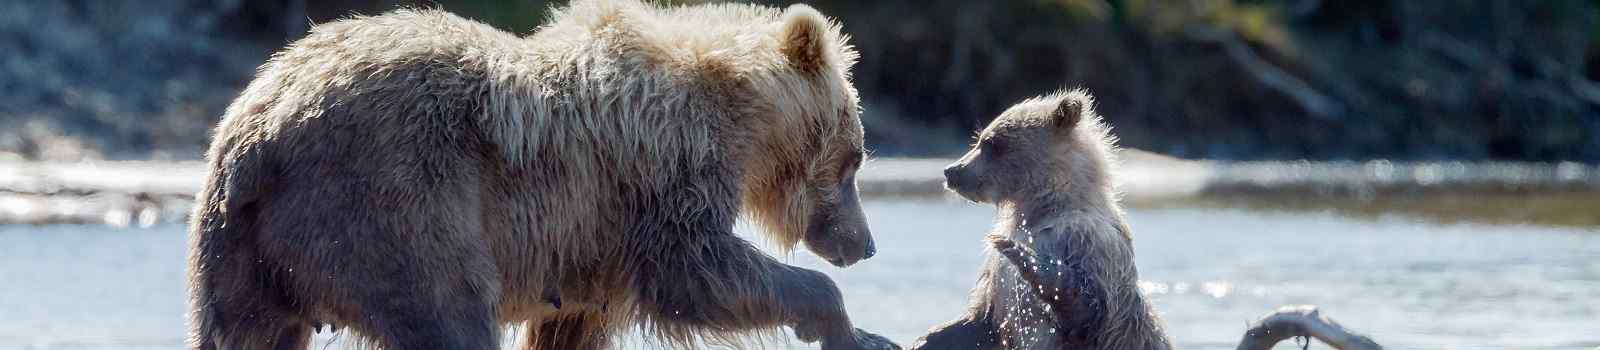 CA-NORDL-YUKON Brown bear female and her cub shutterstock 421064782